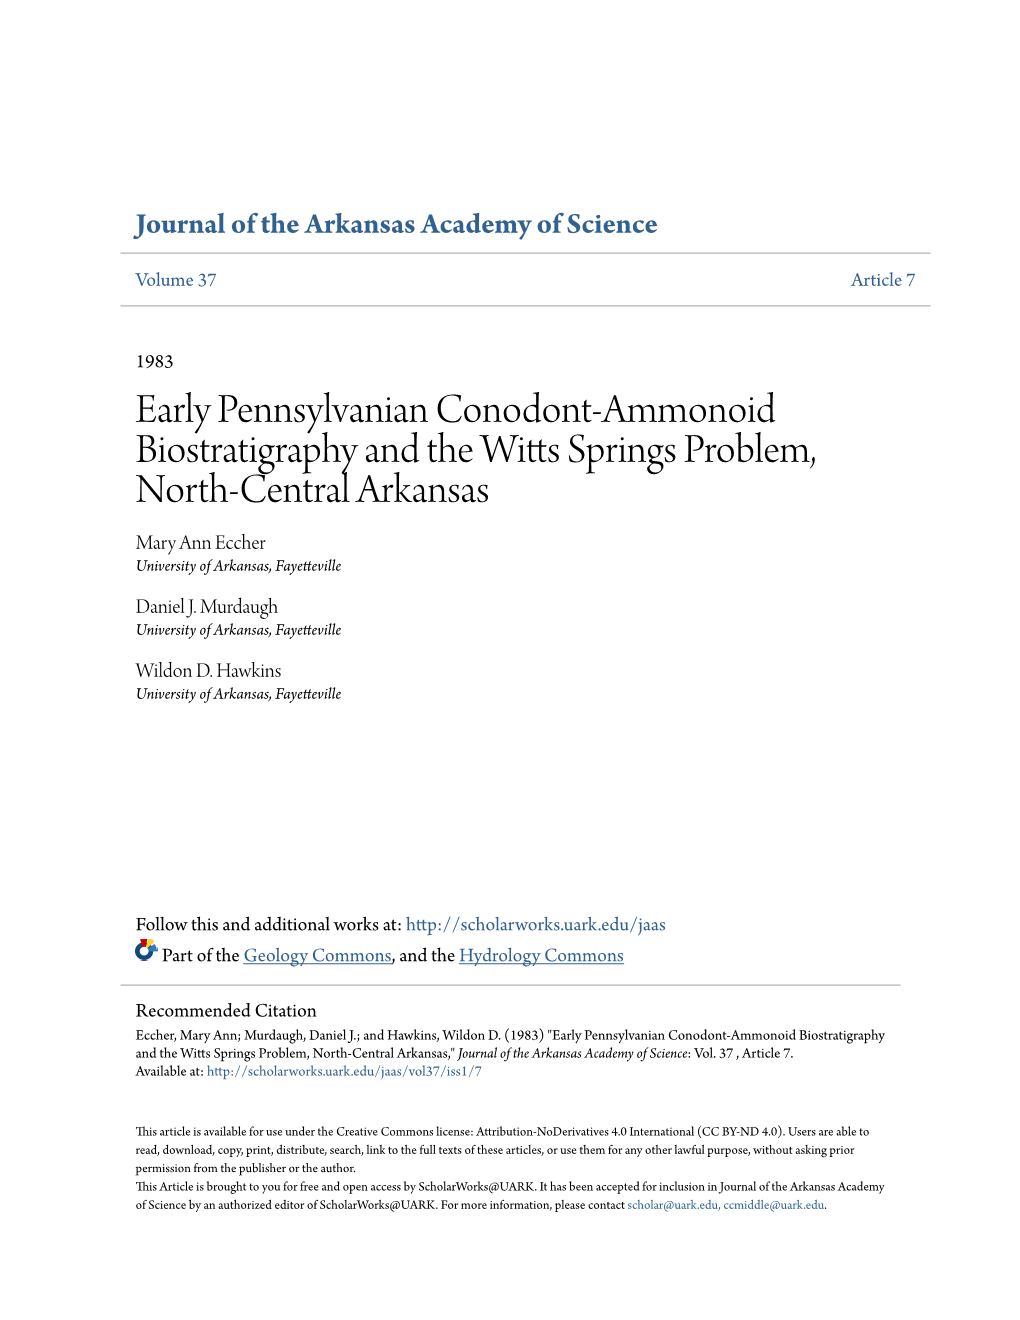 Early Pennsylvanian Conodont-Ammonoid Biostratigraphy and the Witts Springs Problem, North-Central Arkansas Mary Ann Eccher University of Arkansas, Fayetteville